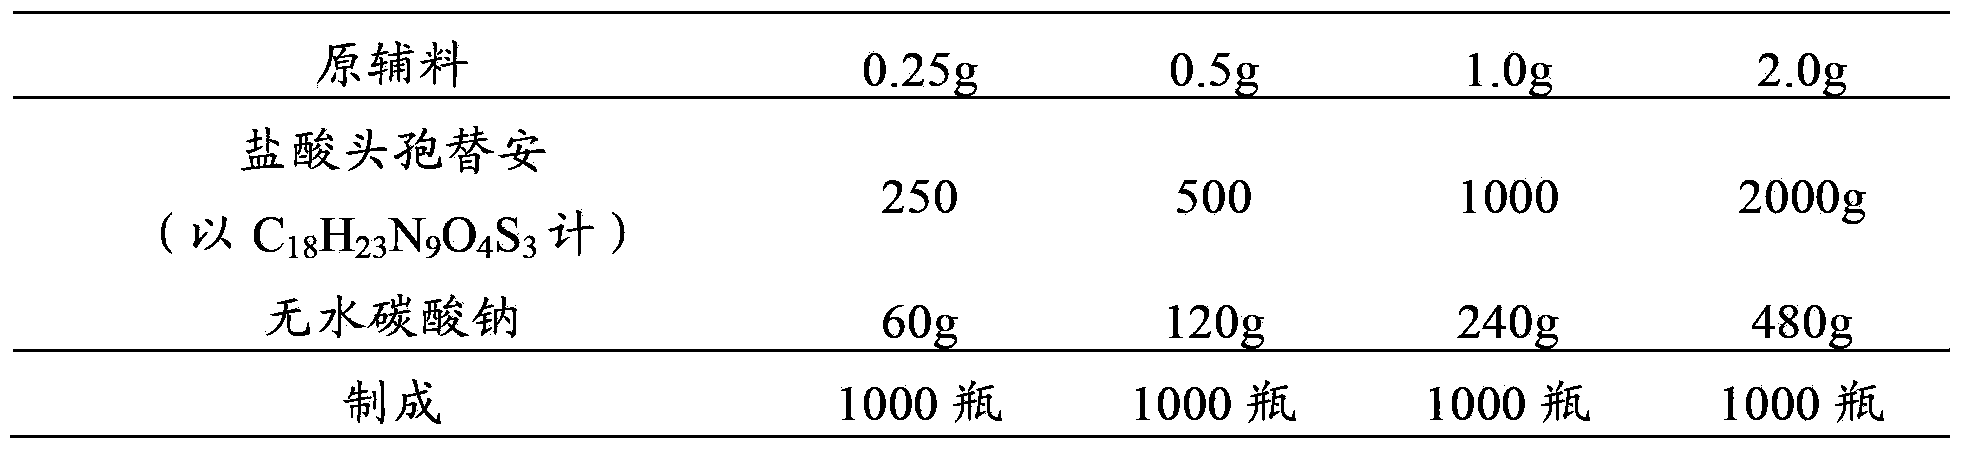 Pharmaceutical composition of cefotiam hydrochloride for injection and compound amino acid injection